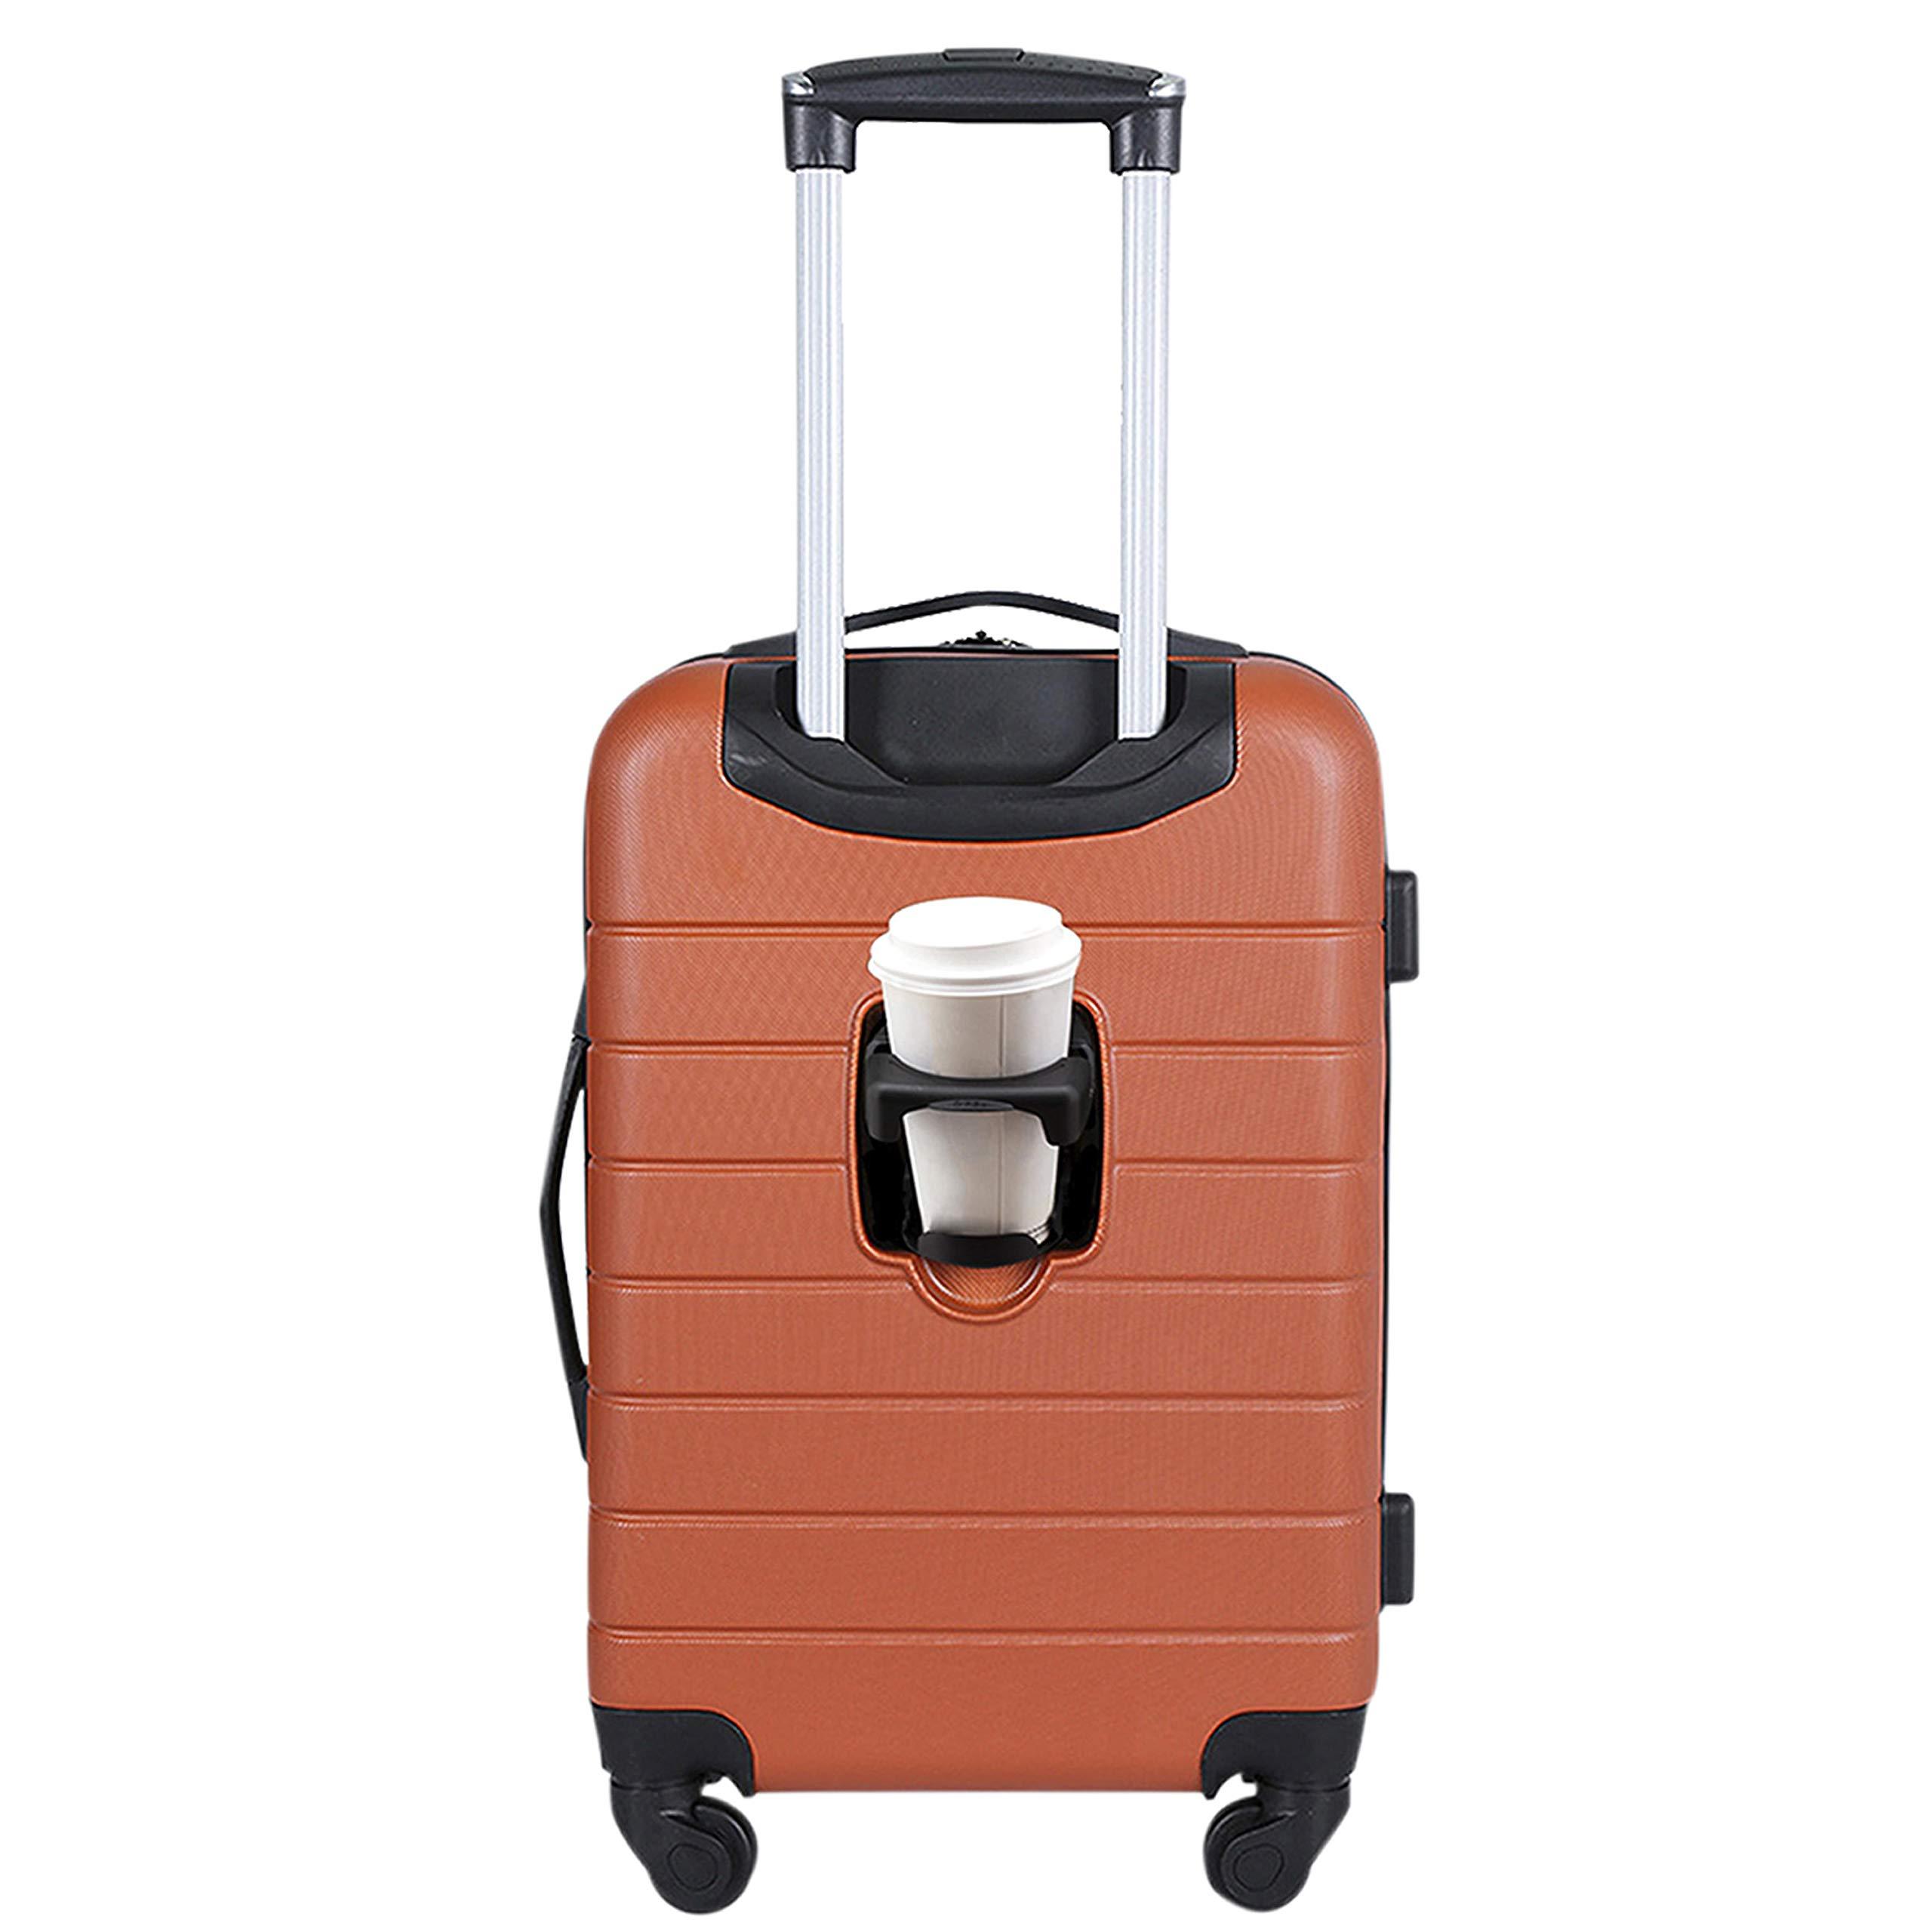 Wrangler Smart Luggage Set With Cup Holder And Usb Port | Lyst